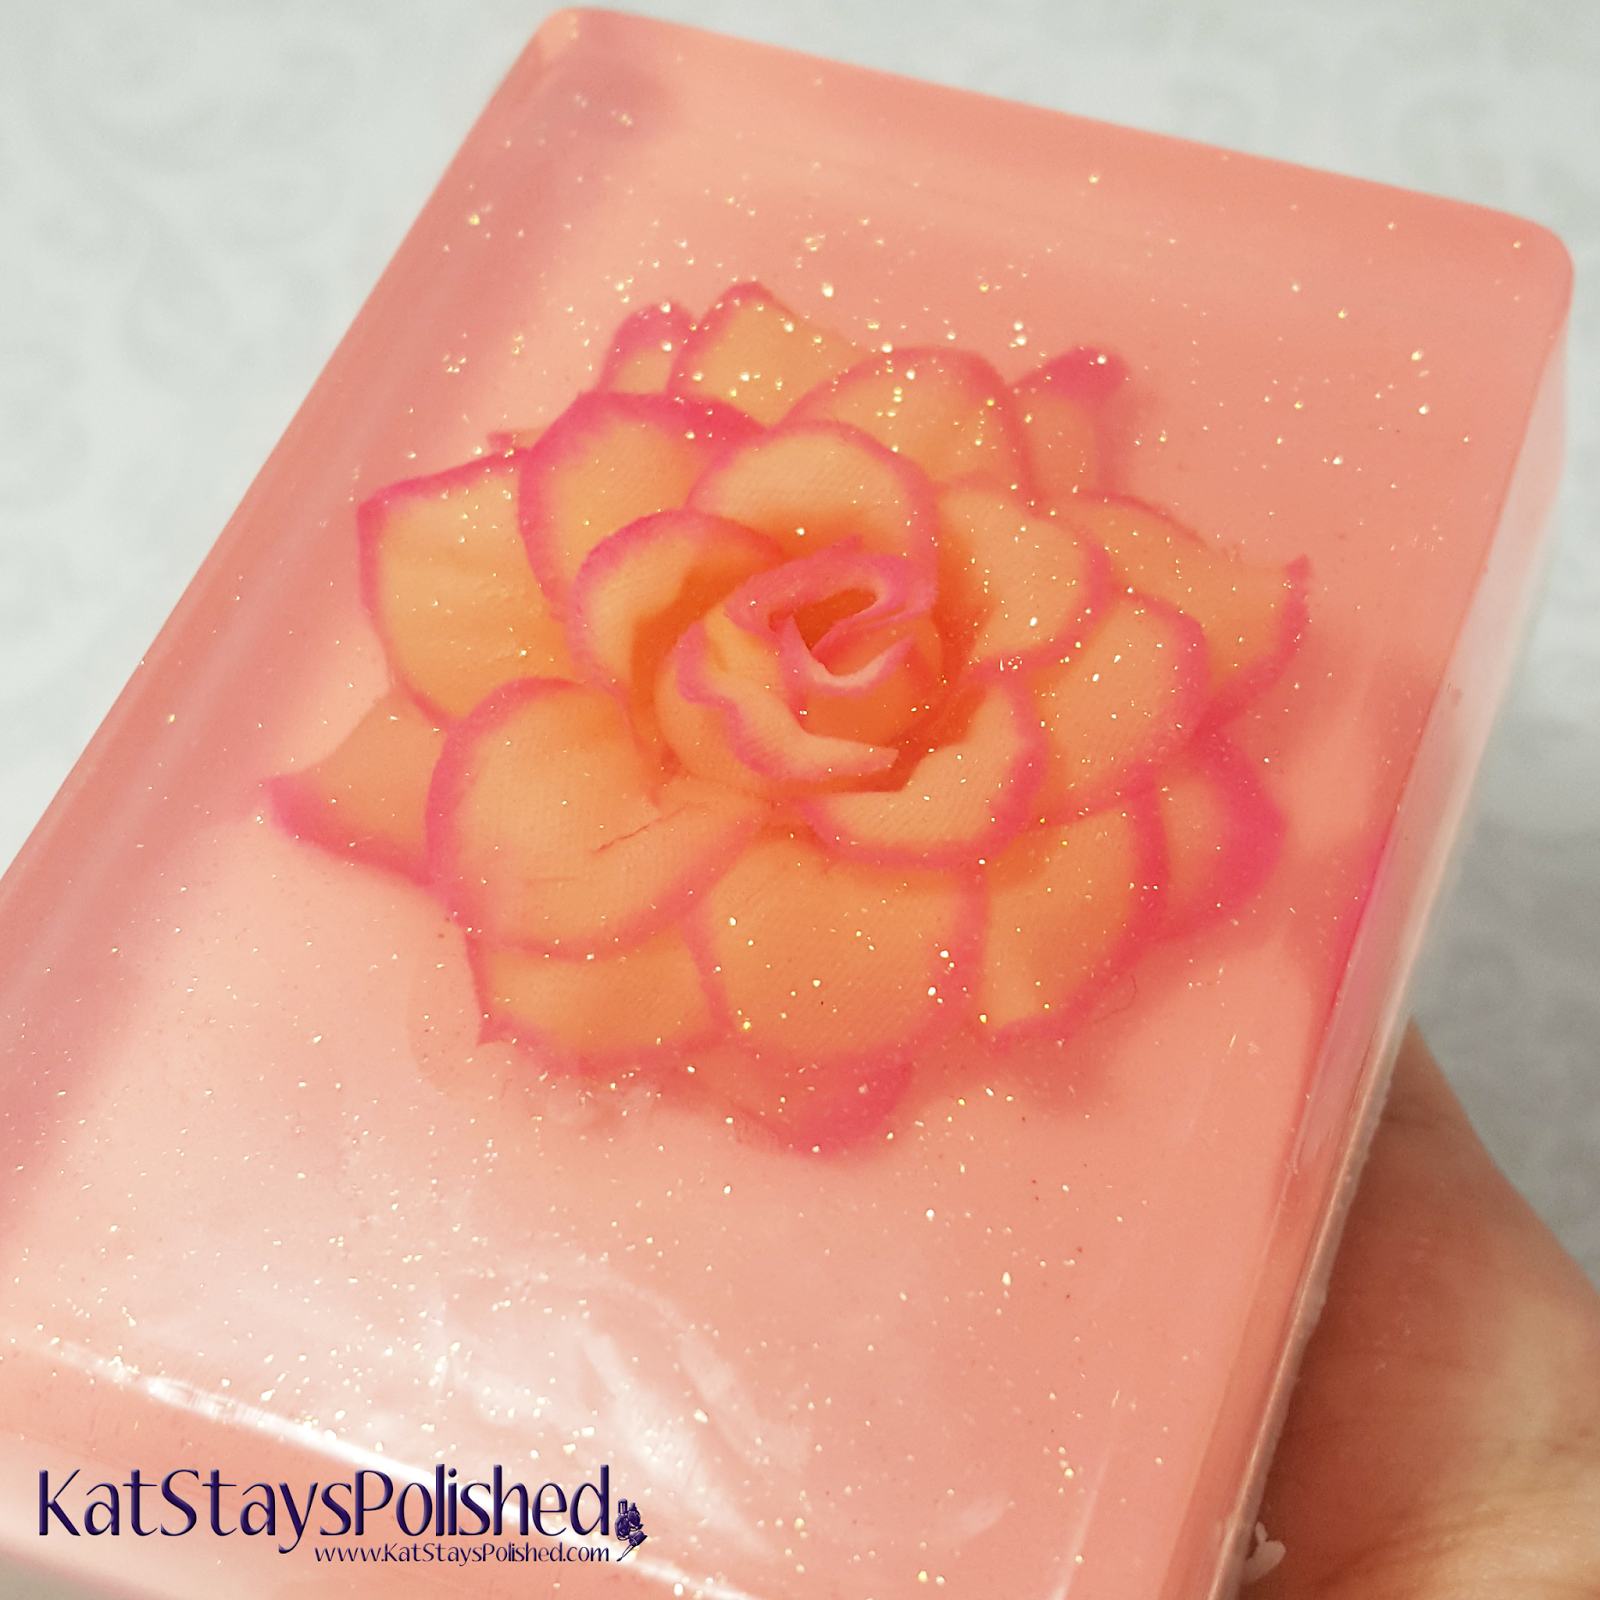 Come Clean Soap - In Full Bloom | Kat Stays Polished